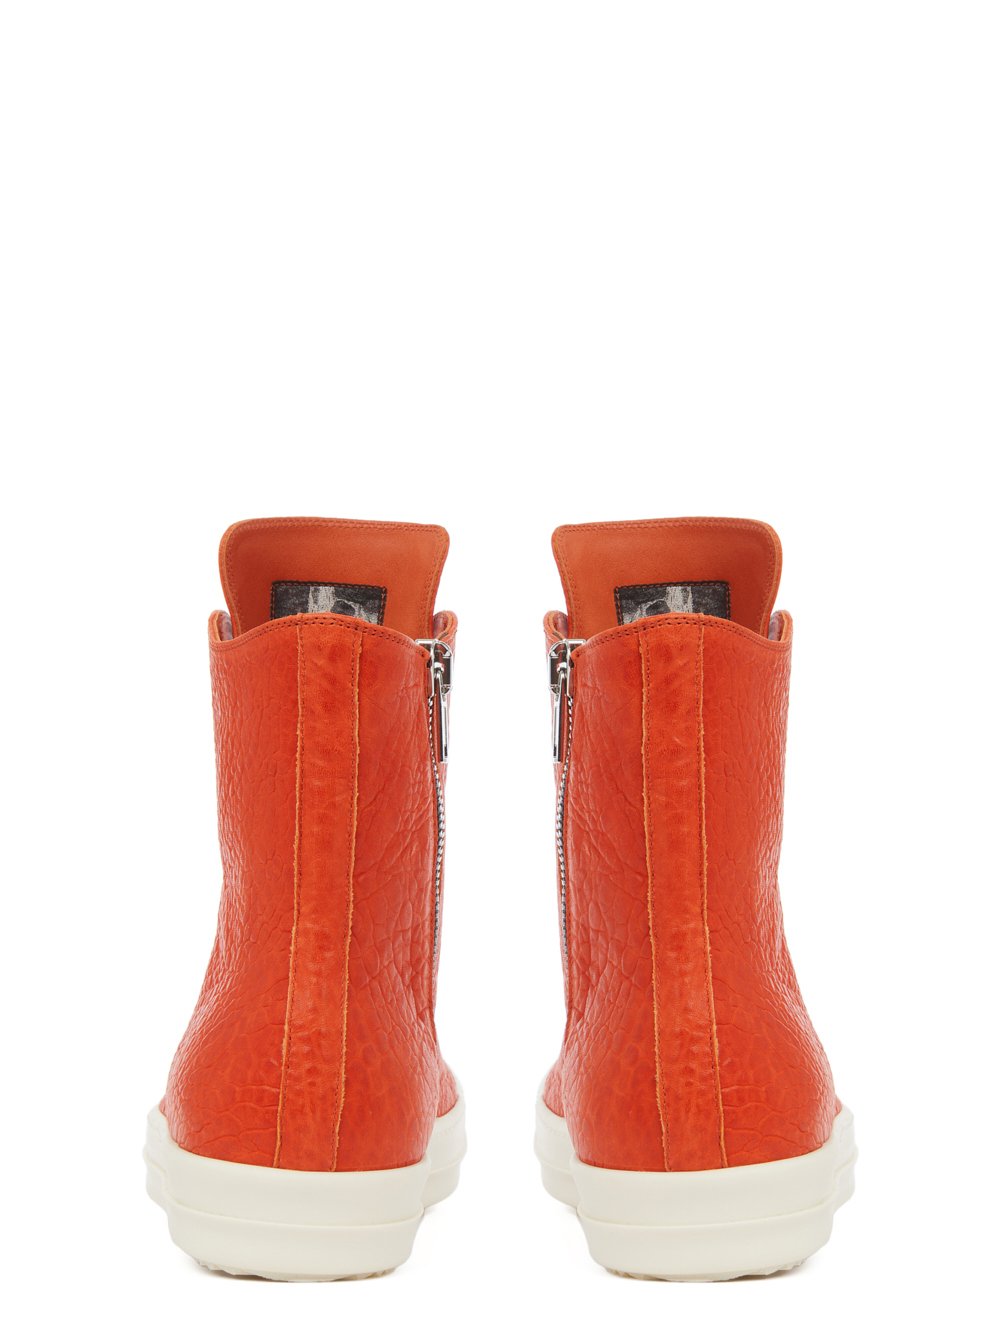 Rick Owens RICK OWENS FW22 STROBE SNEAKERS IN ORANGE AND MILK BUBBLE LAMB LEAHTER